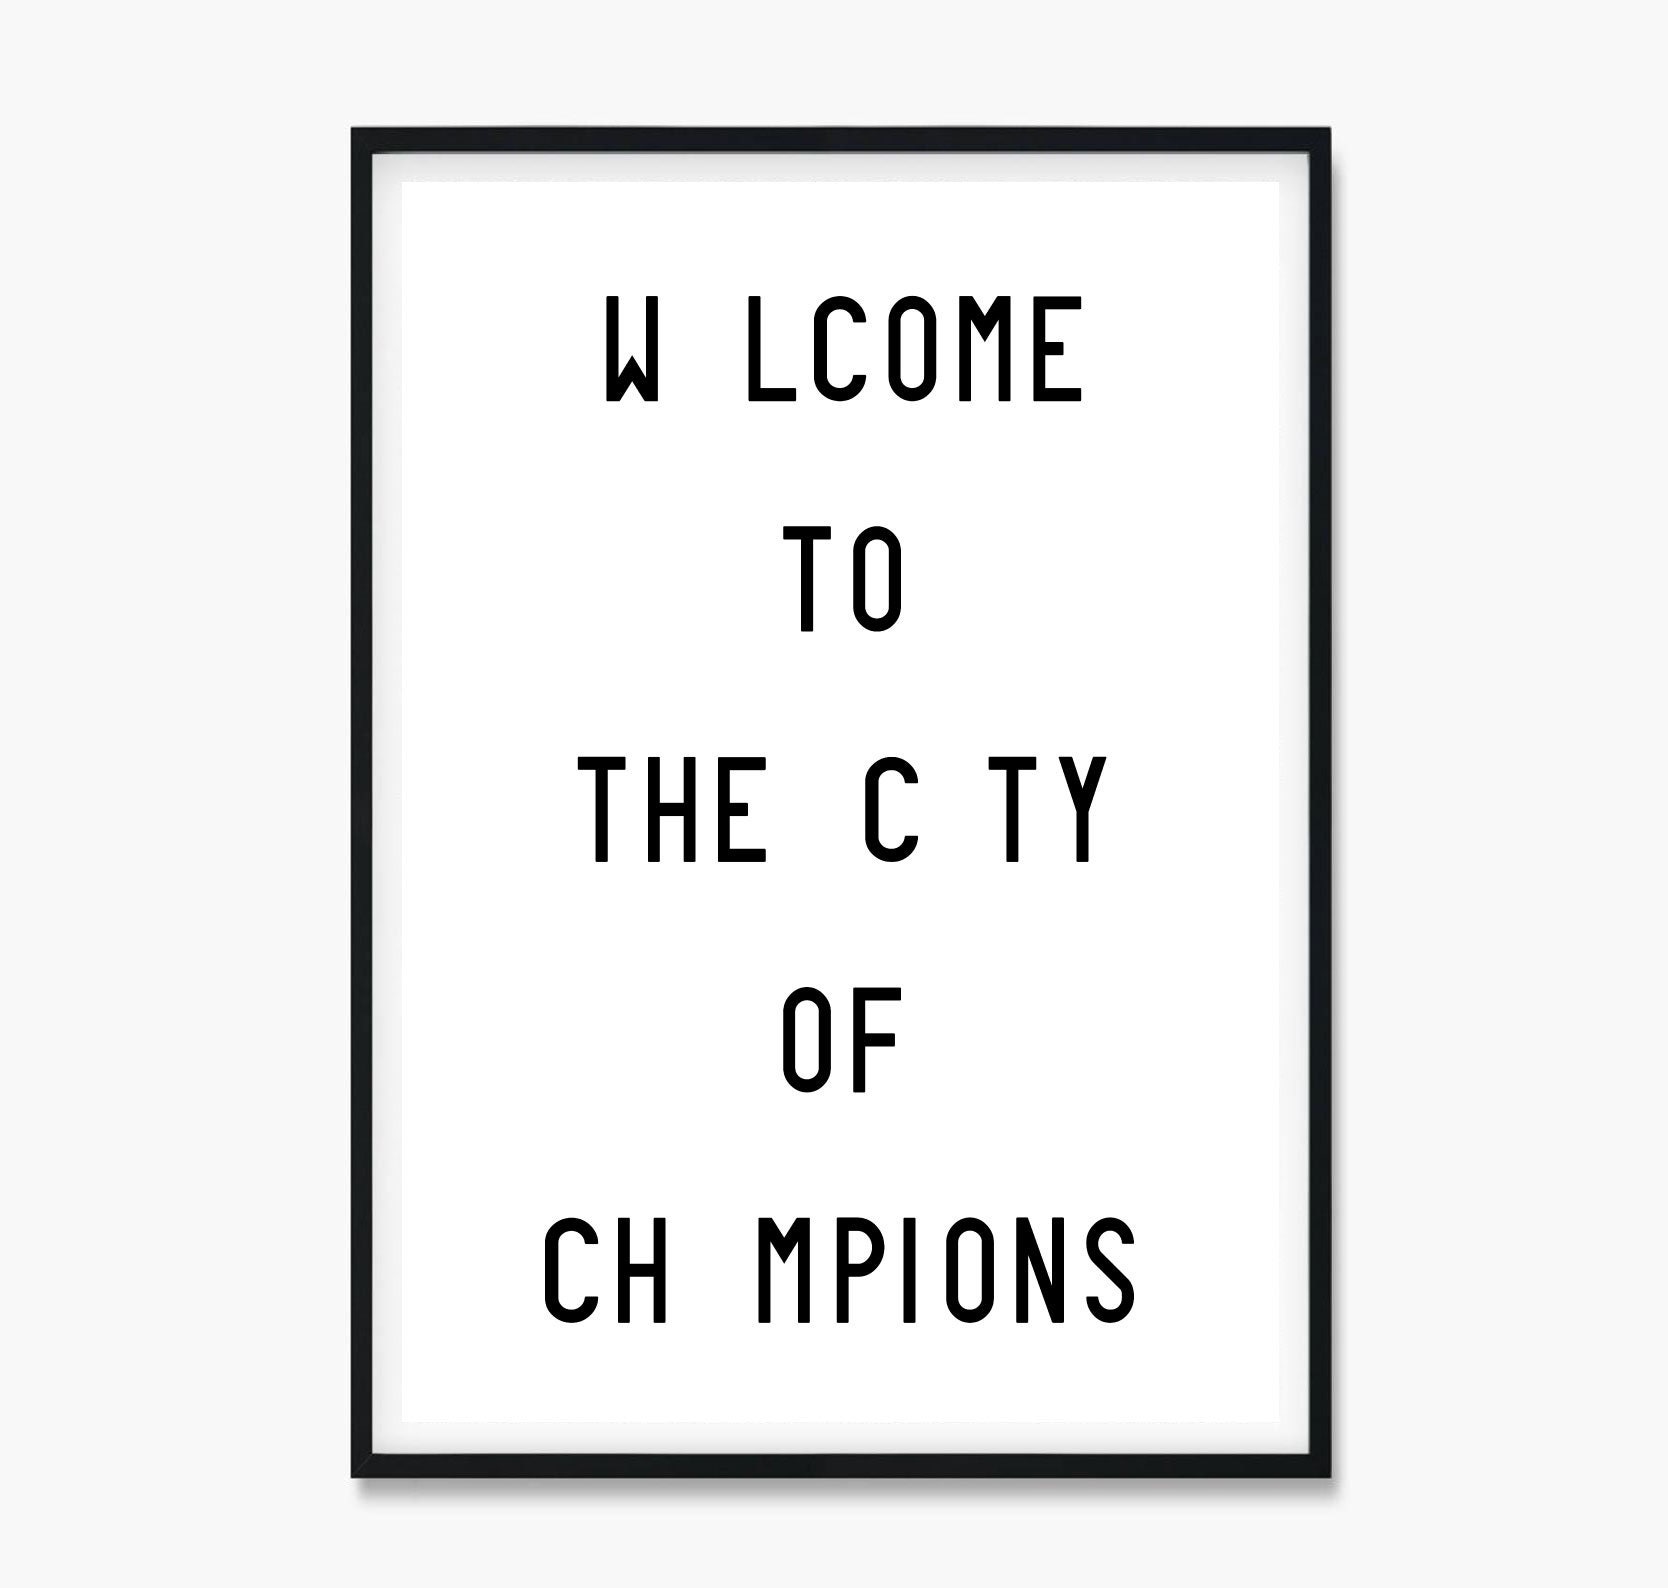 kombination modnes samtale Welcome to the City of Champions Art Print Poster Welcome to - Etsy